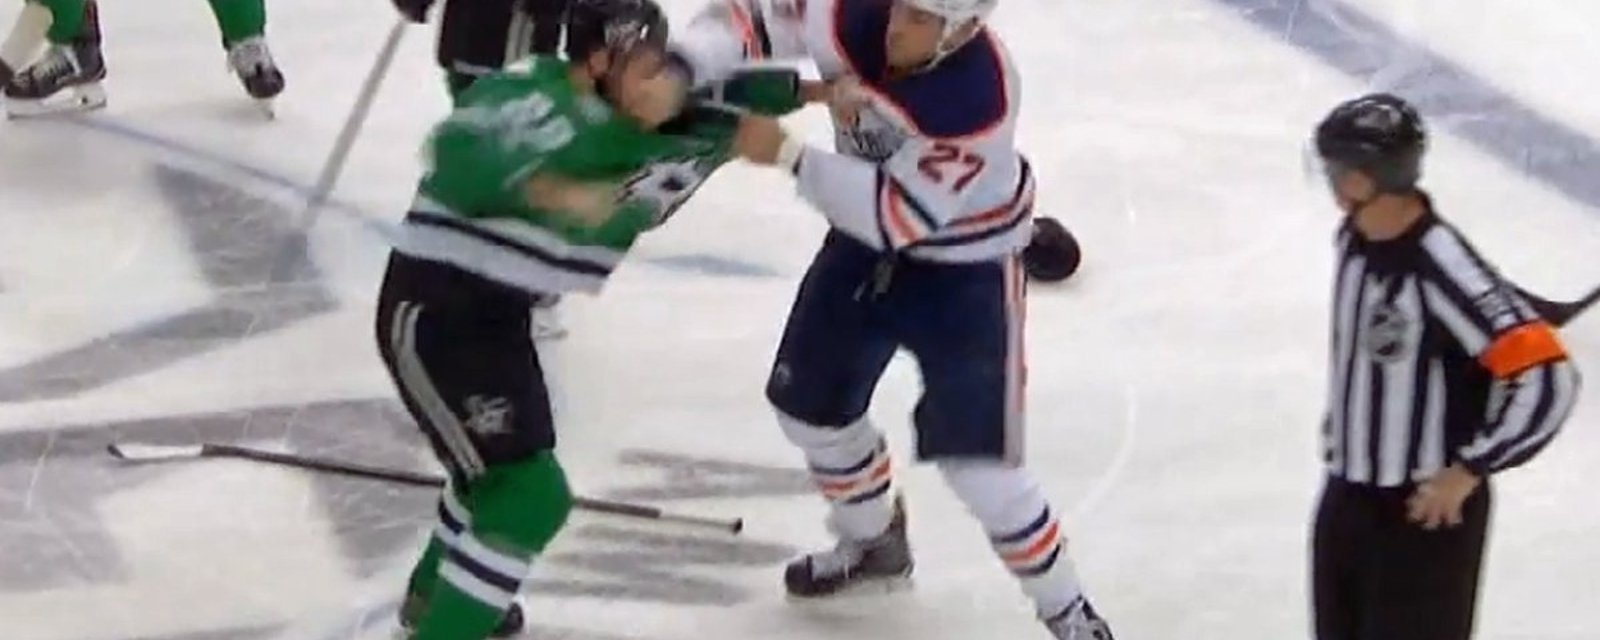 Lucic and Pateryn drop the gloves in heated heavyweight fight!